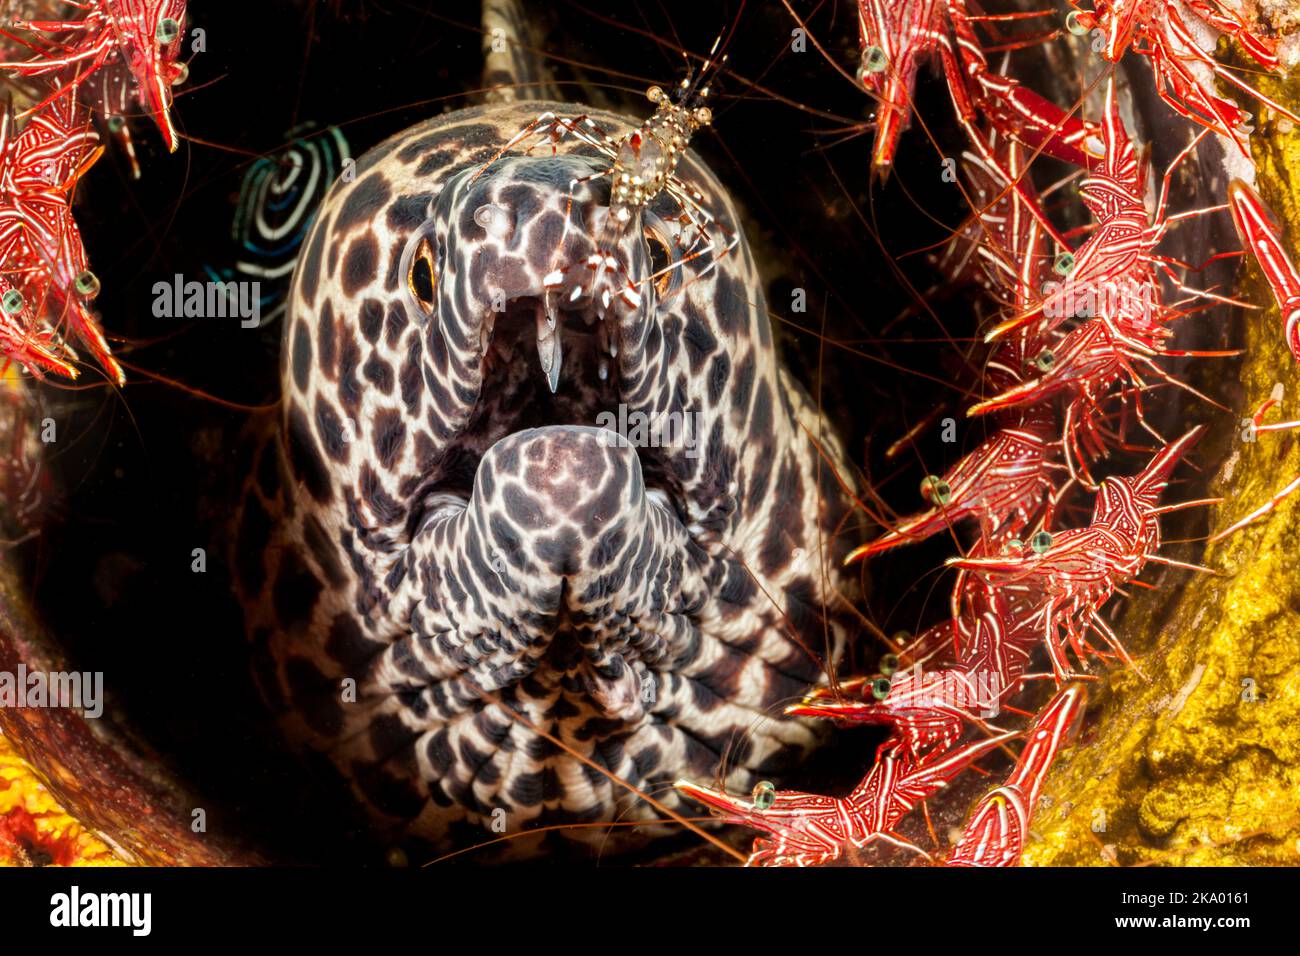 This honeycomb moray eel, Gymnothorax favagineus, is surrounded by male and female dancing shrimp, Rhynchocinetes uritai, and has a cleaner shrimp, Ur Stock Photo